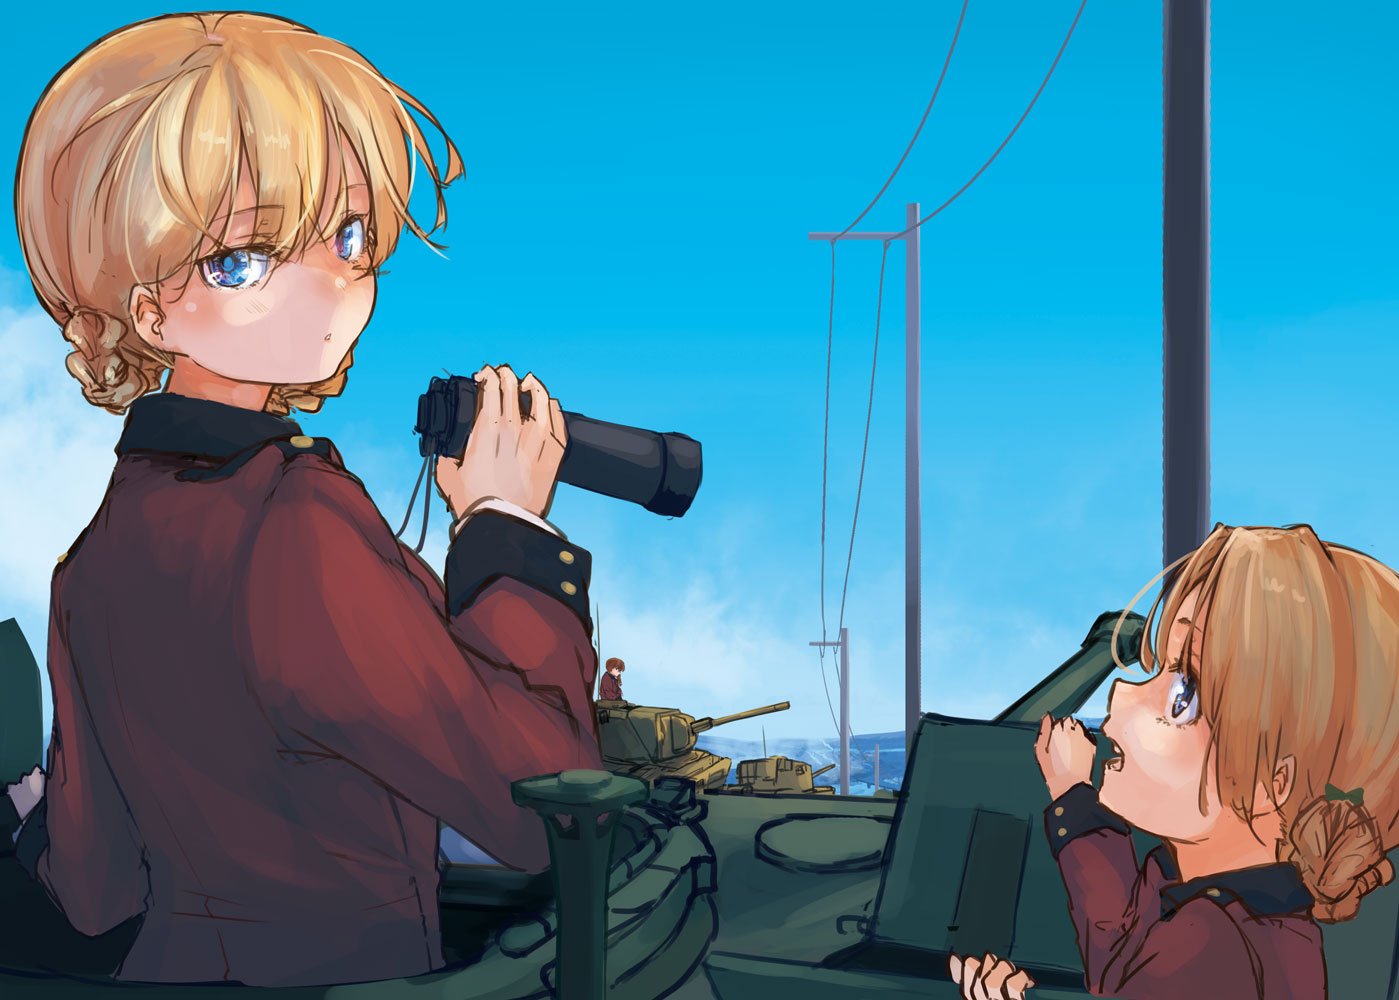 2girls bangs binoculars black_bow blonde_hair blue_eyes bow braid commentary_request darjeeling day epaulettes eyebrows_visible_through_hair from_behind girls_und_panzer hair_bow holding jacket long_sleeves looking_at_viewer looking_back military military_uniform multiple_girls orange_hair orange_pekoe outdoors parted_lips red_jacket shiragiku1991 short_hair sky st._gloriana's_military_uniform standing tank_cupola telephone_pole tied_hair twin_braids uniform vehicle_request